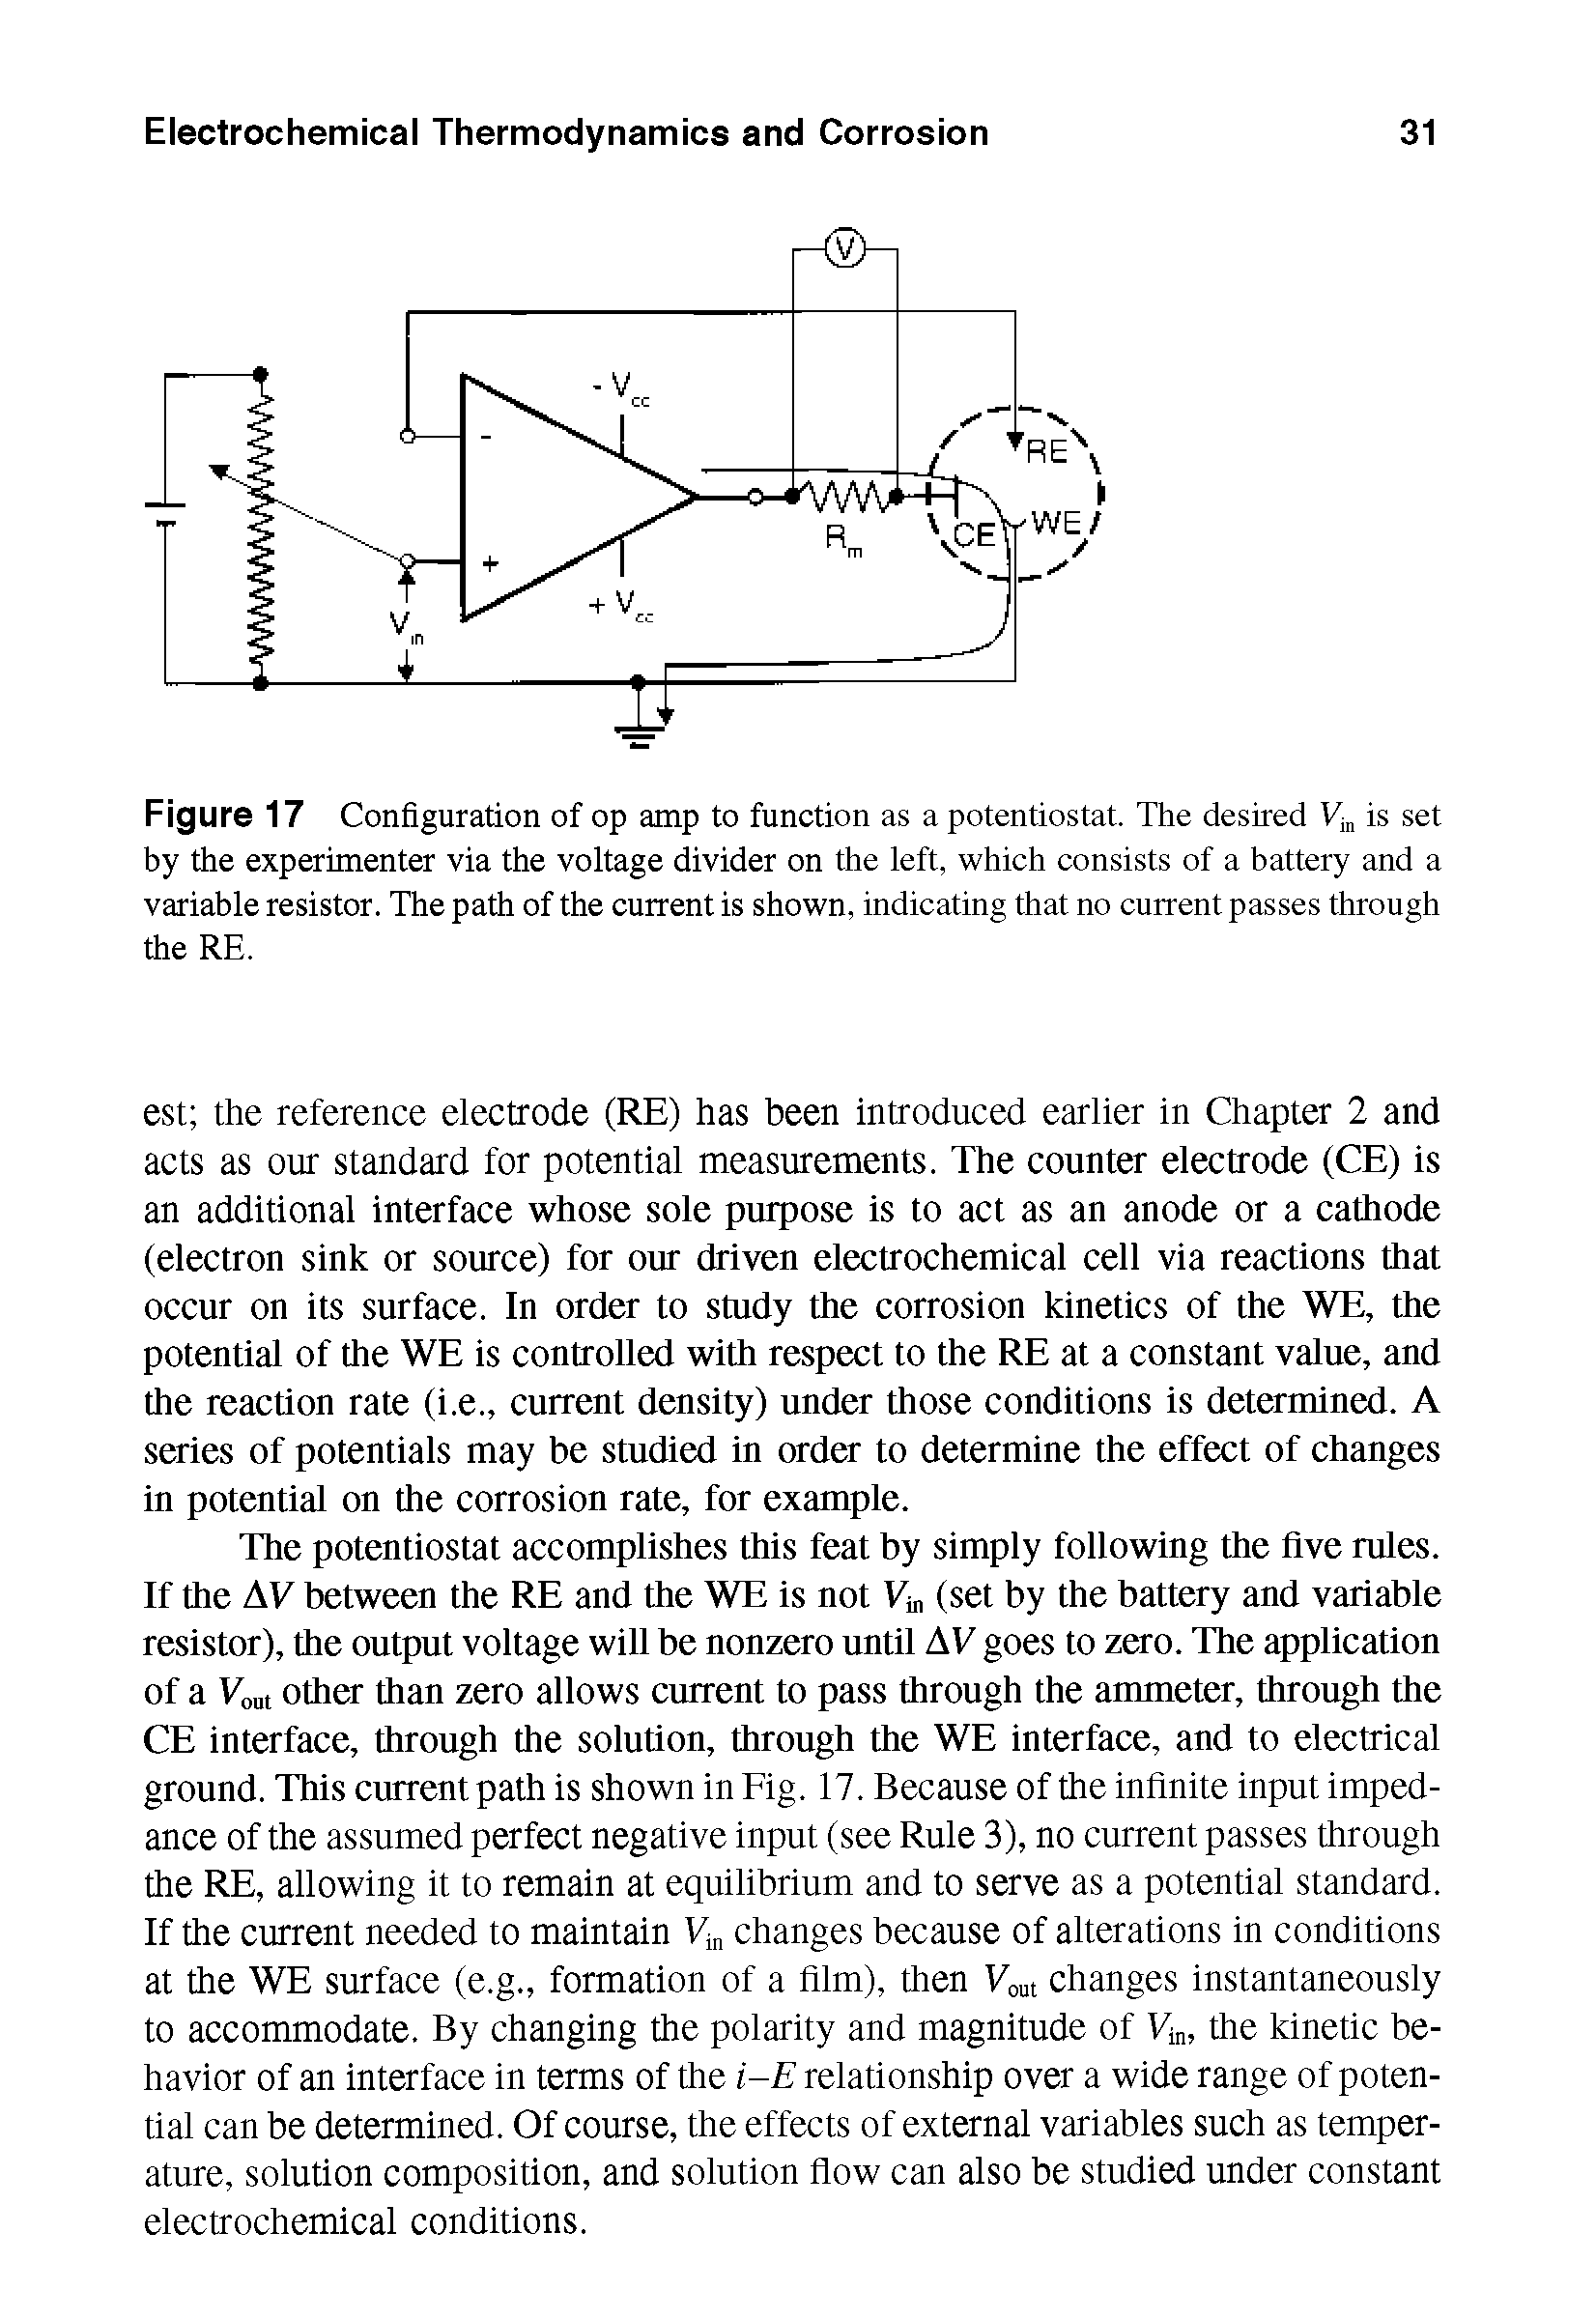 Figure 17 Configuration of op amp to function as a potentiostat. The desired Vin is set by the experimenter via the voltage divider on the left, which consists of a battery and a variable resistor. The path of the current is shown, indicating that no current passes through the RE.